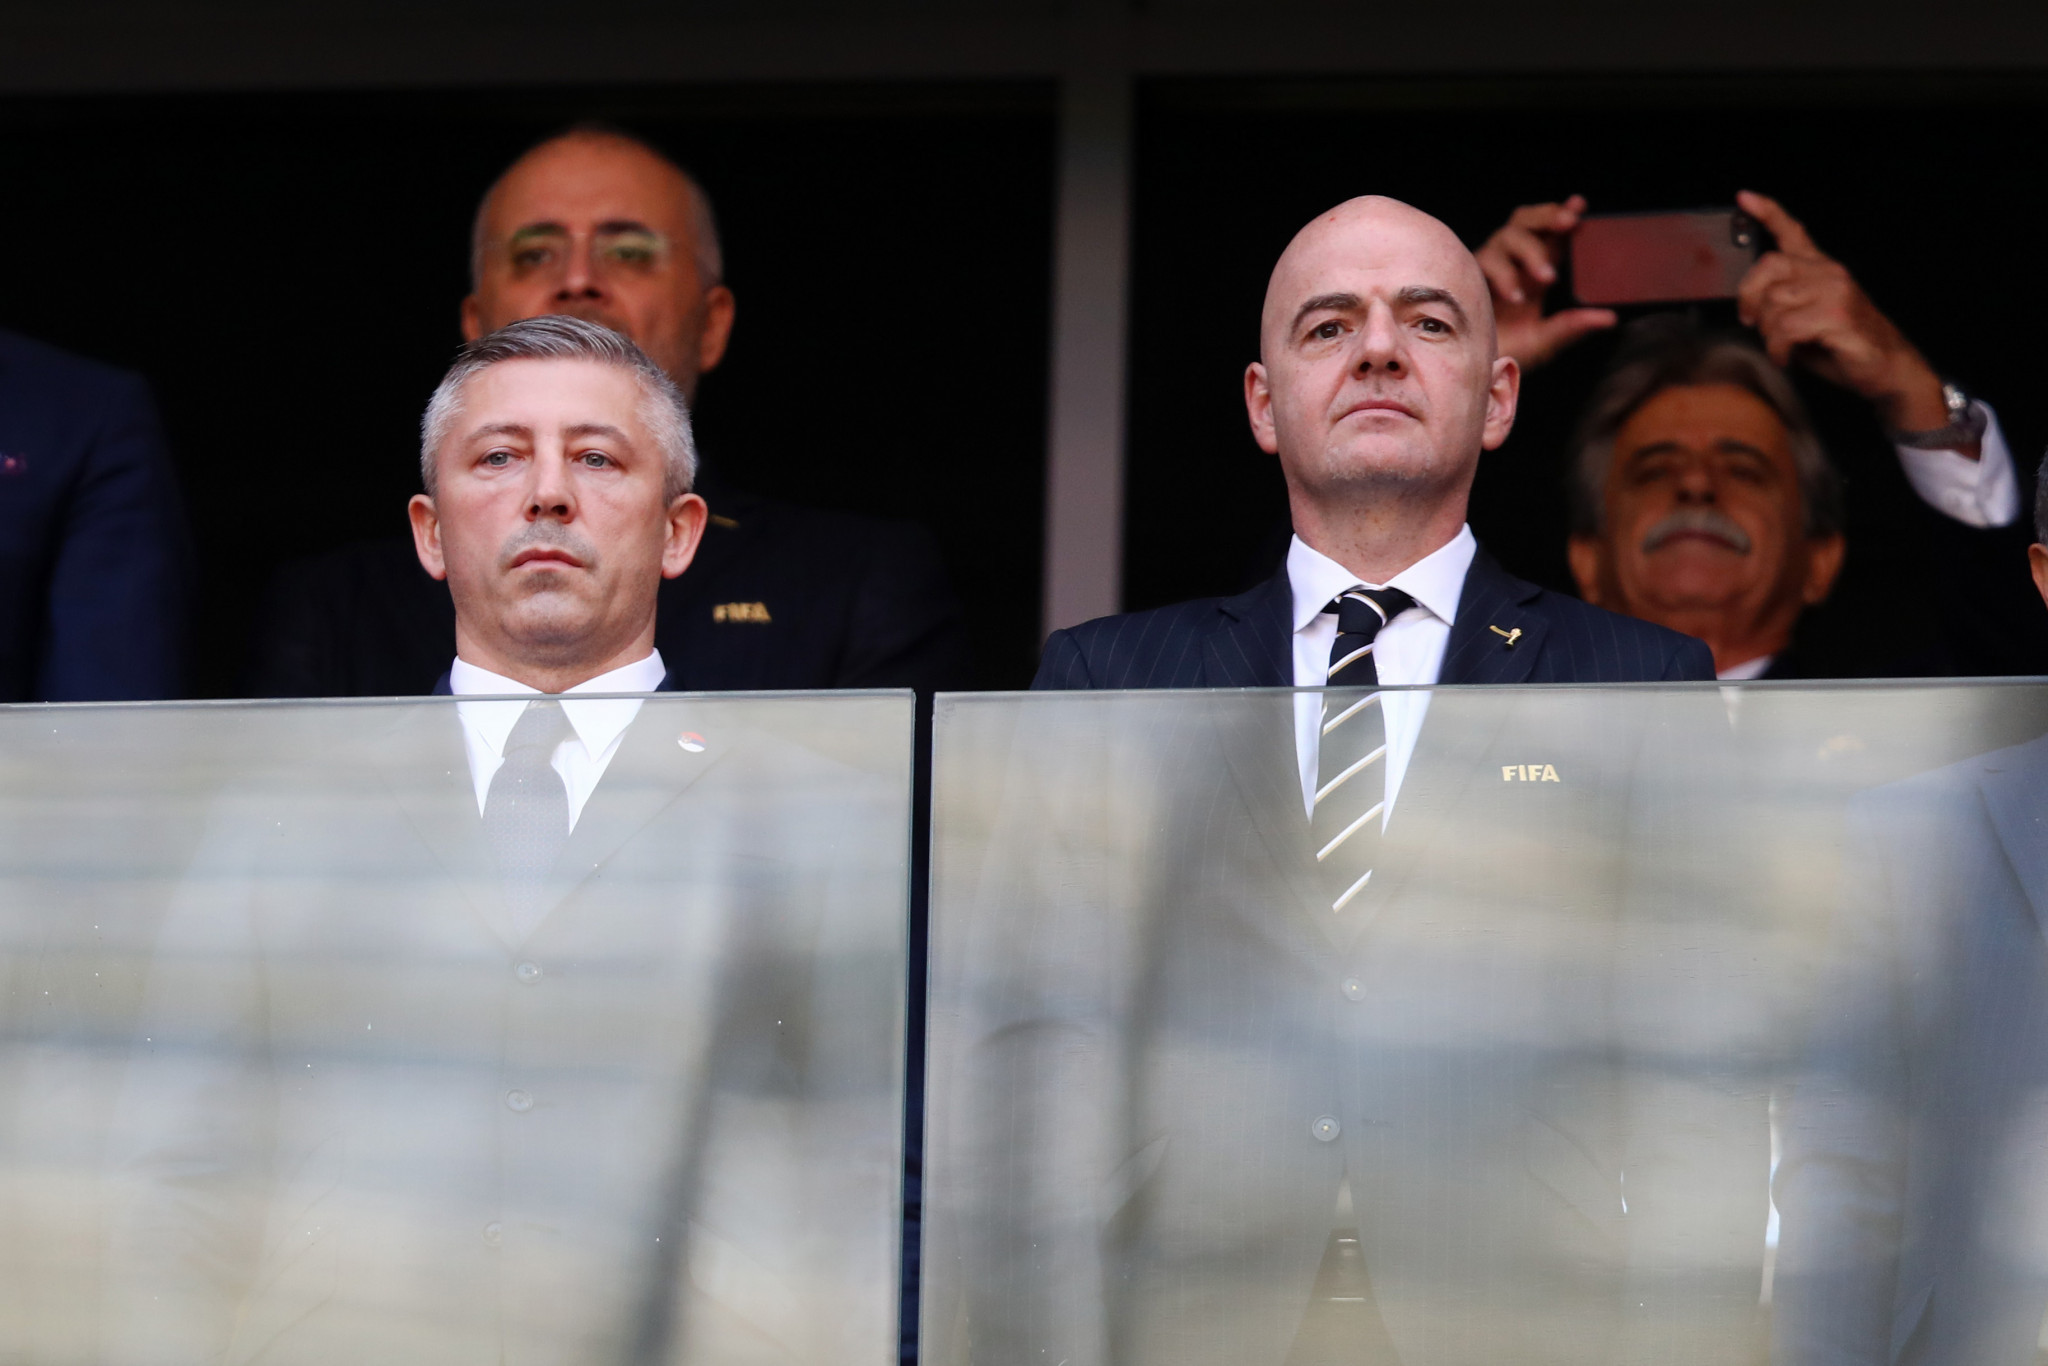 Football Association of Serbia President resigns after being linked to organised crime